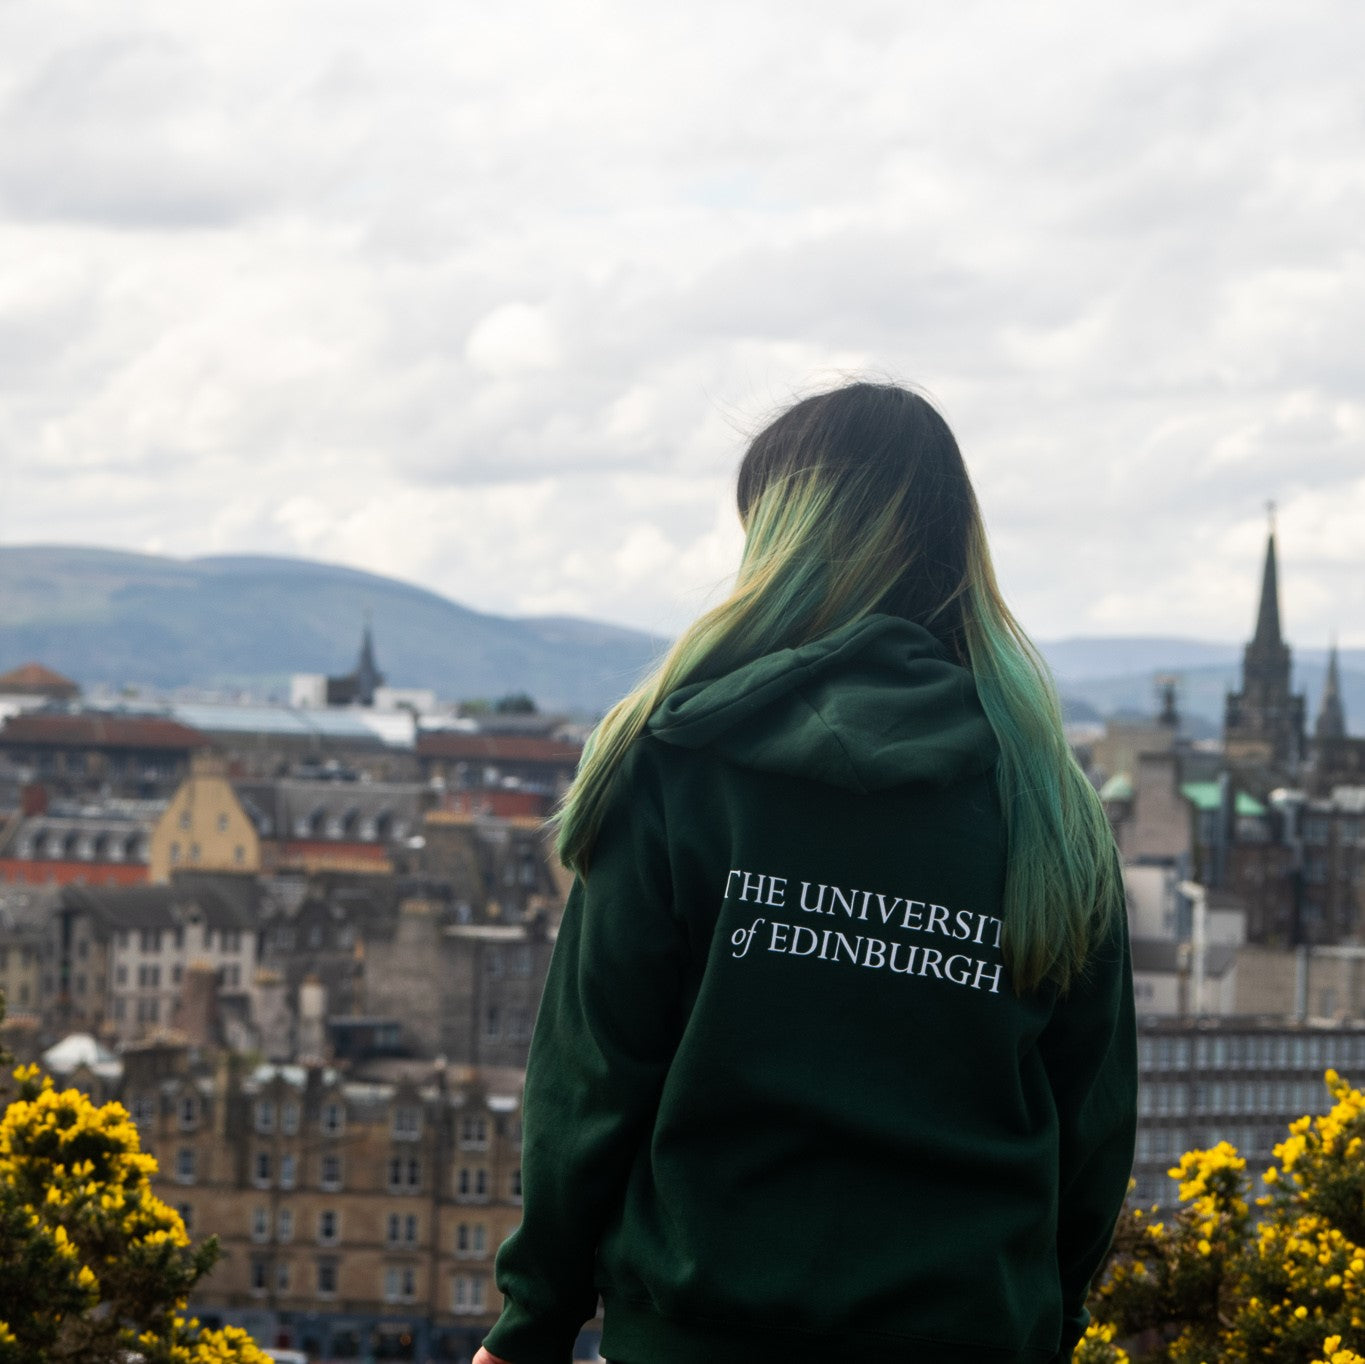 Our Model wears Classic Embroidered Zipped Hoodie in Green, pictured from behind